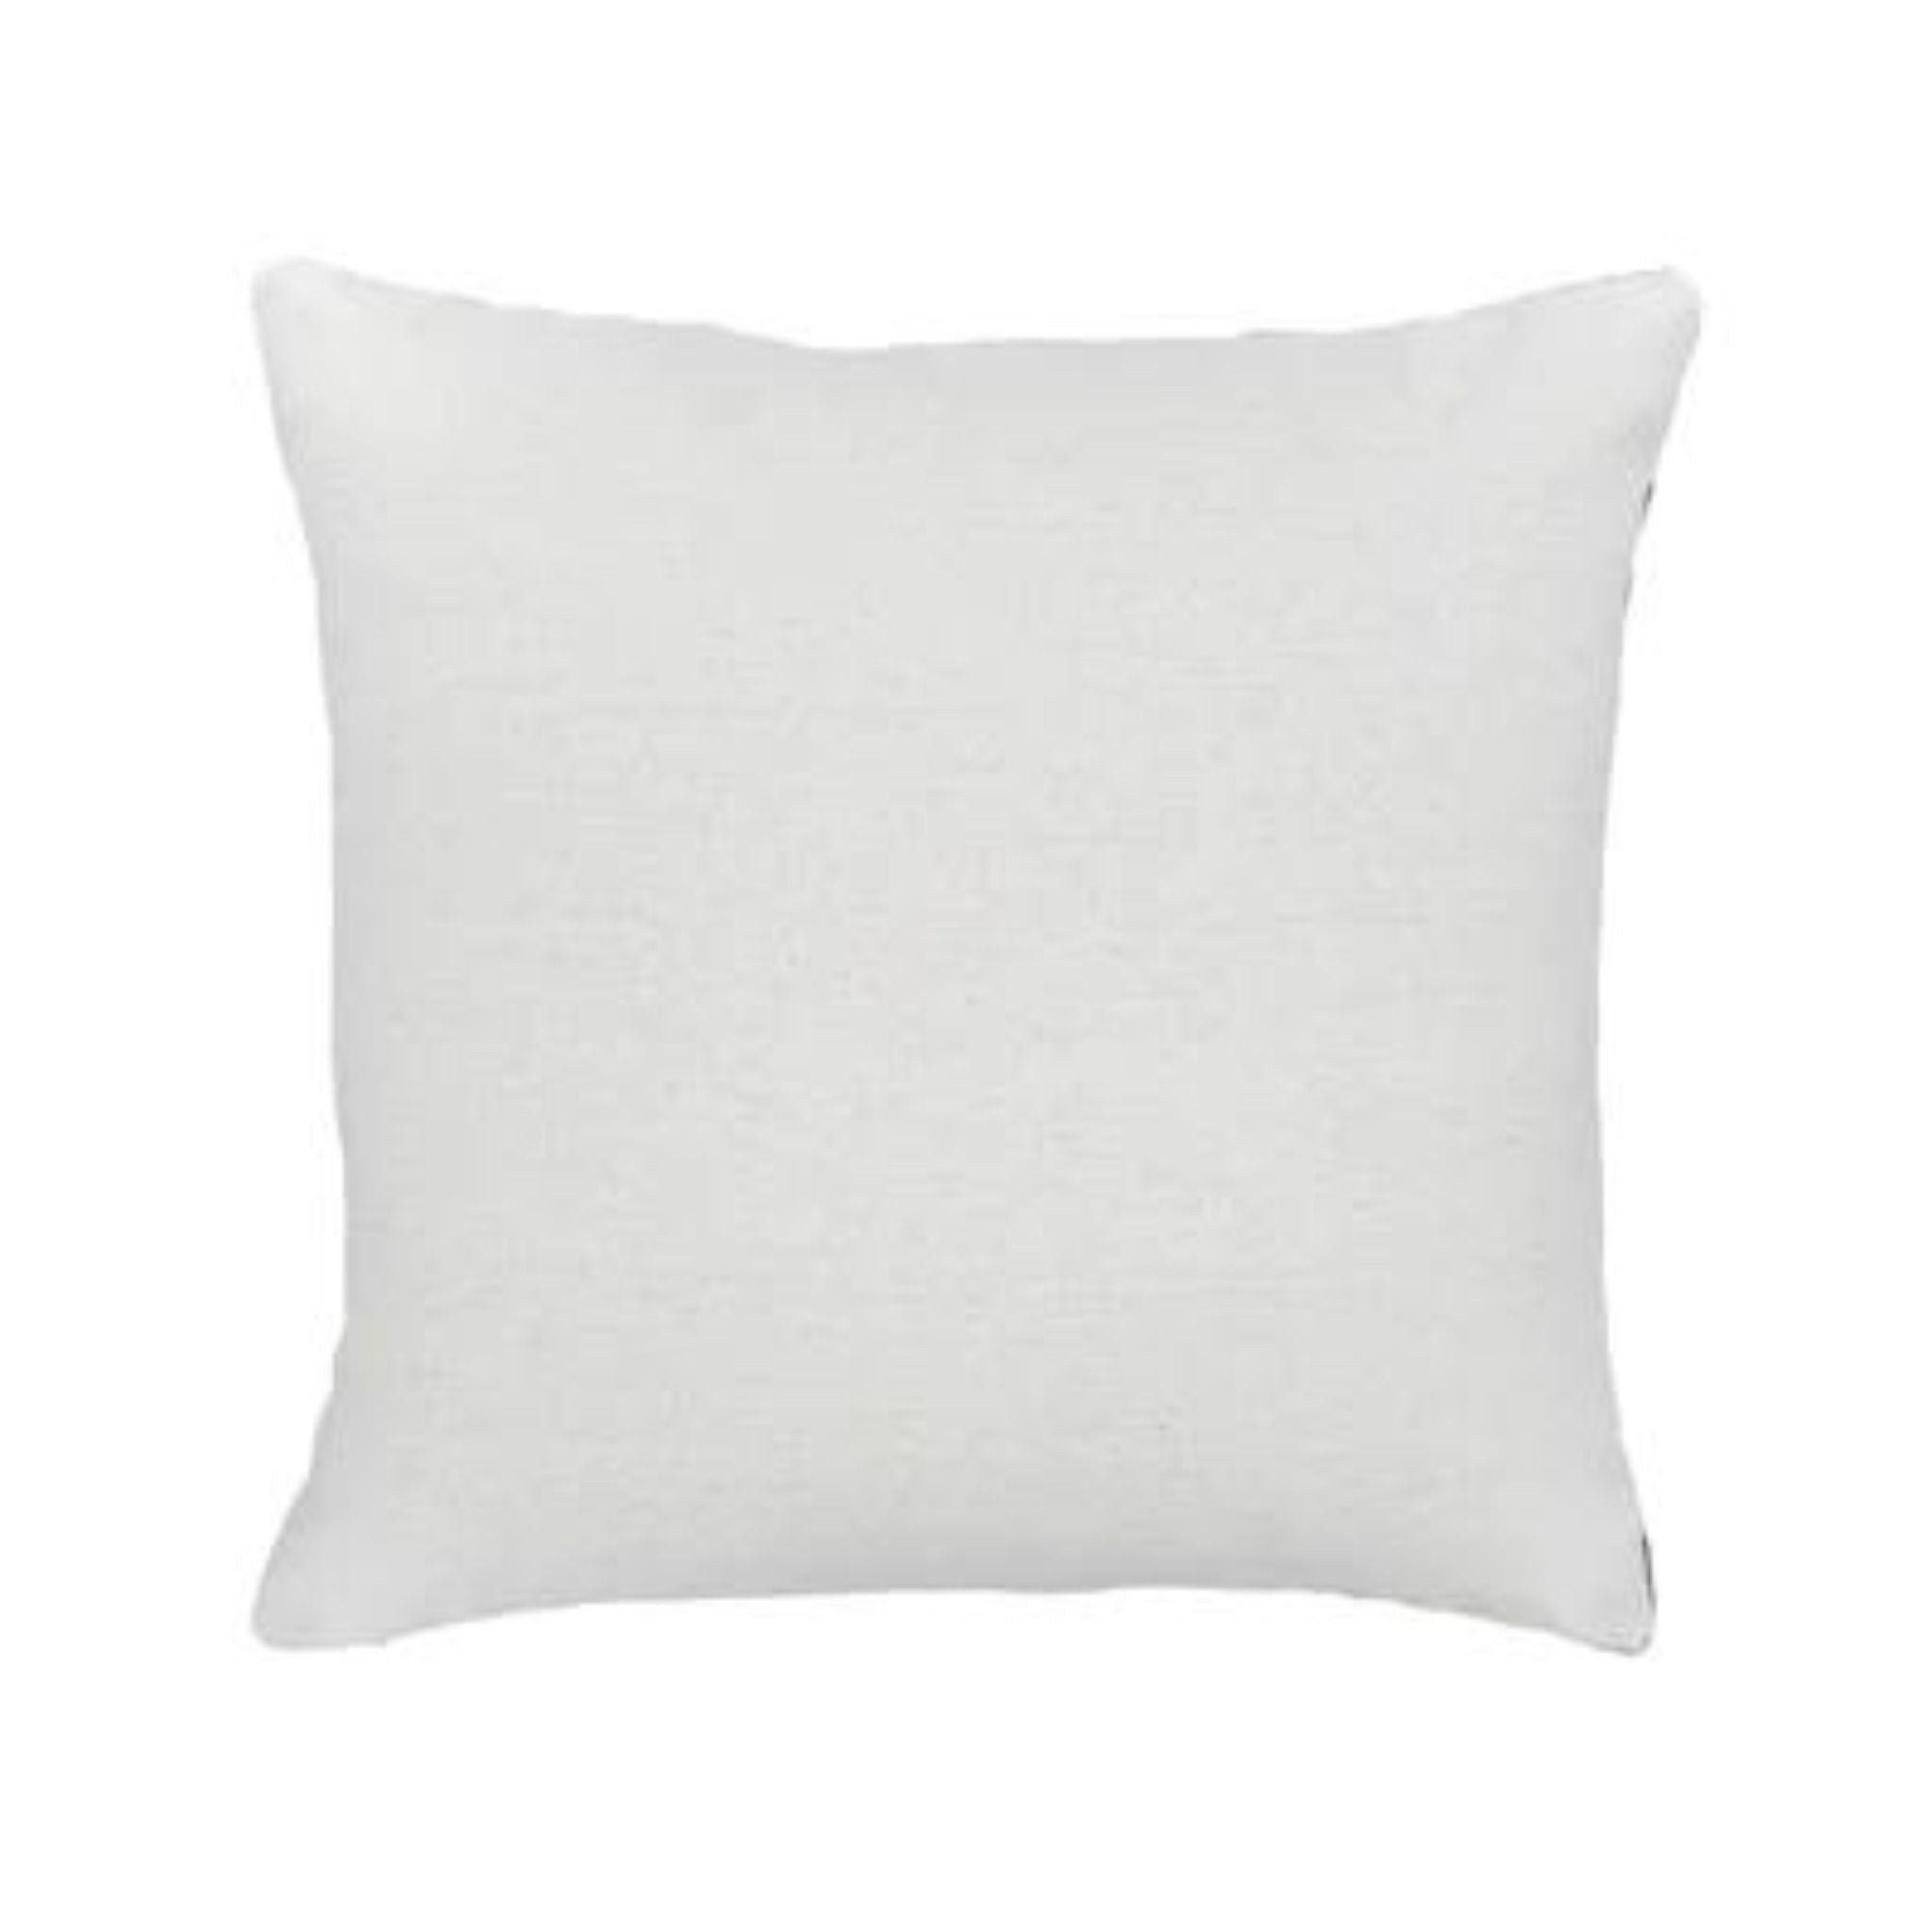 ZELDA THROW PILLOW - Simply Elevated Home Furnishings 